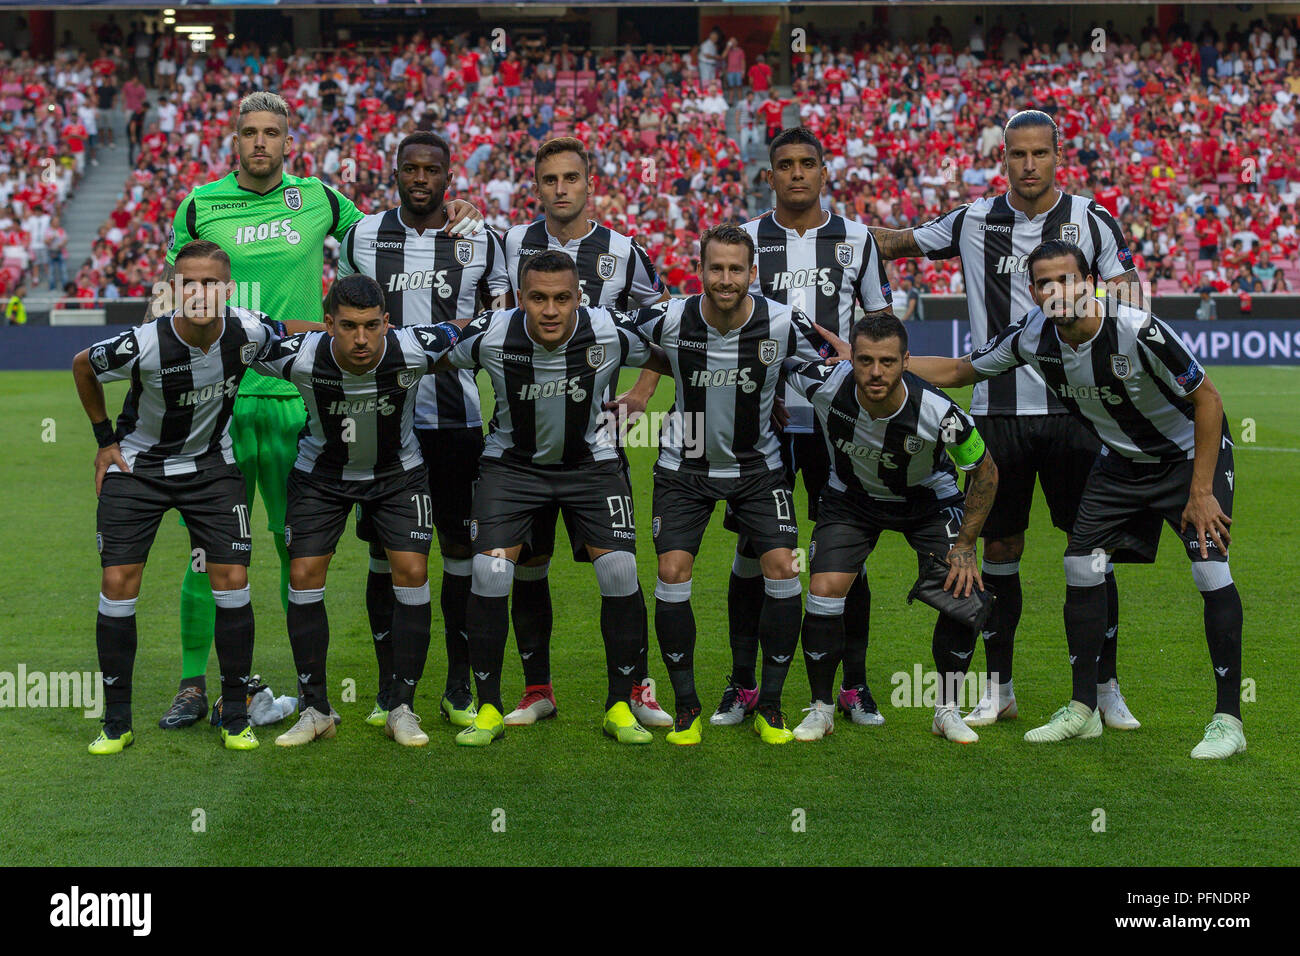 Lisbon, Portugal. August 21, 2018. PAOK starting team for the game of the 1st leg of the Playoffs of the UEFA Champions League, SL Benfica vs PAOK © Alexandre de Sousa/Alamy Live News Stock Photo